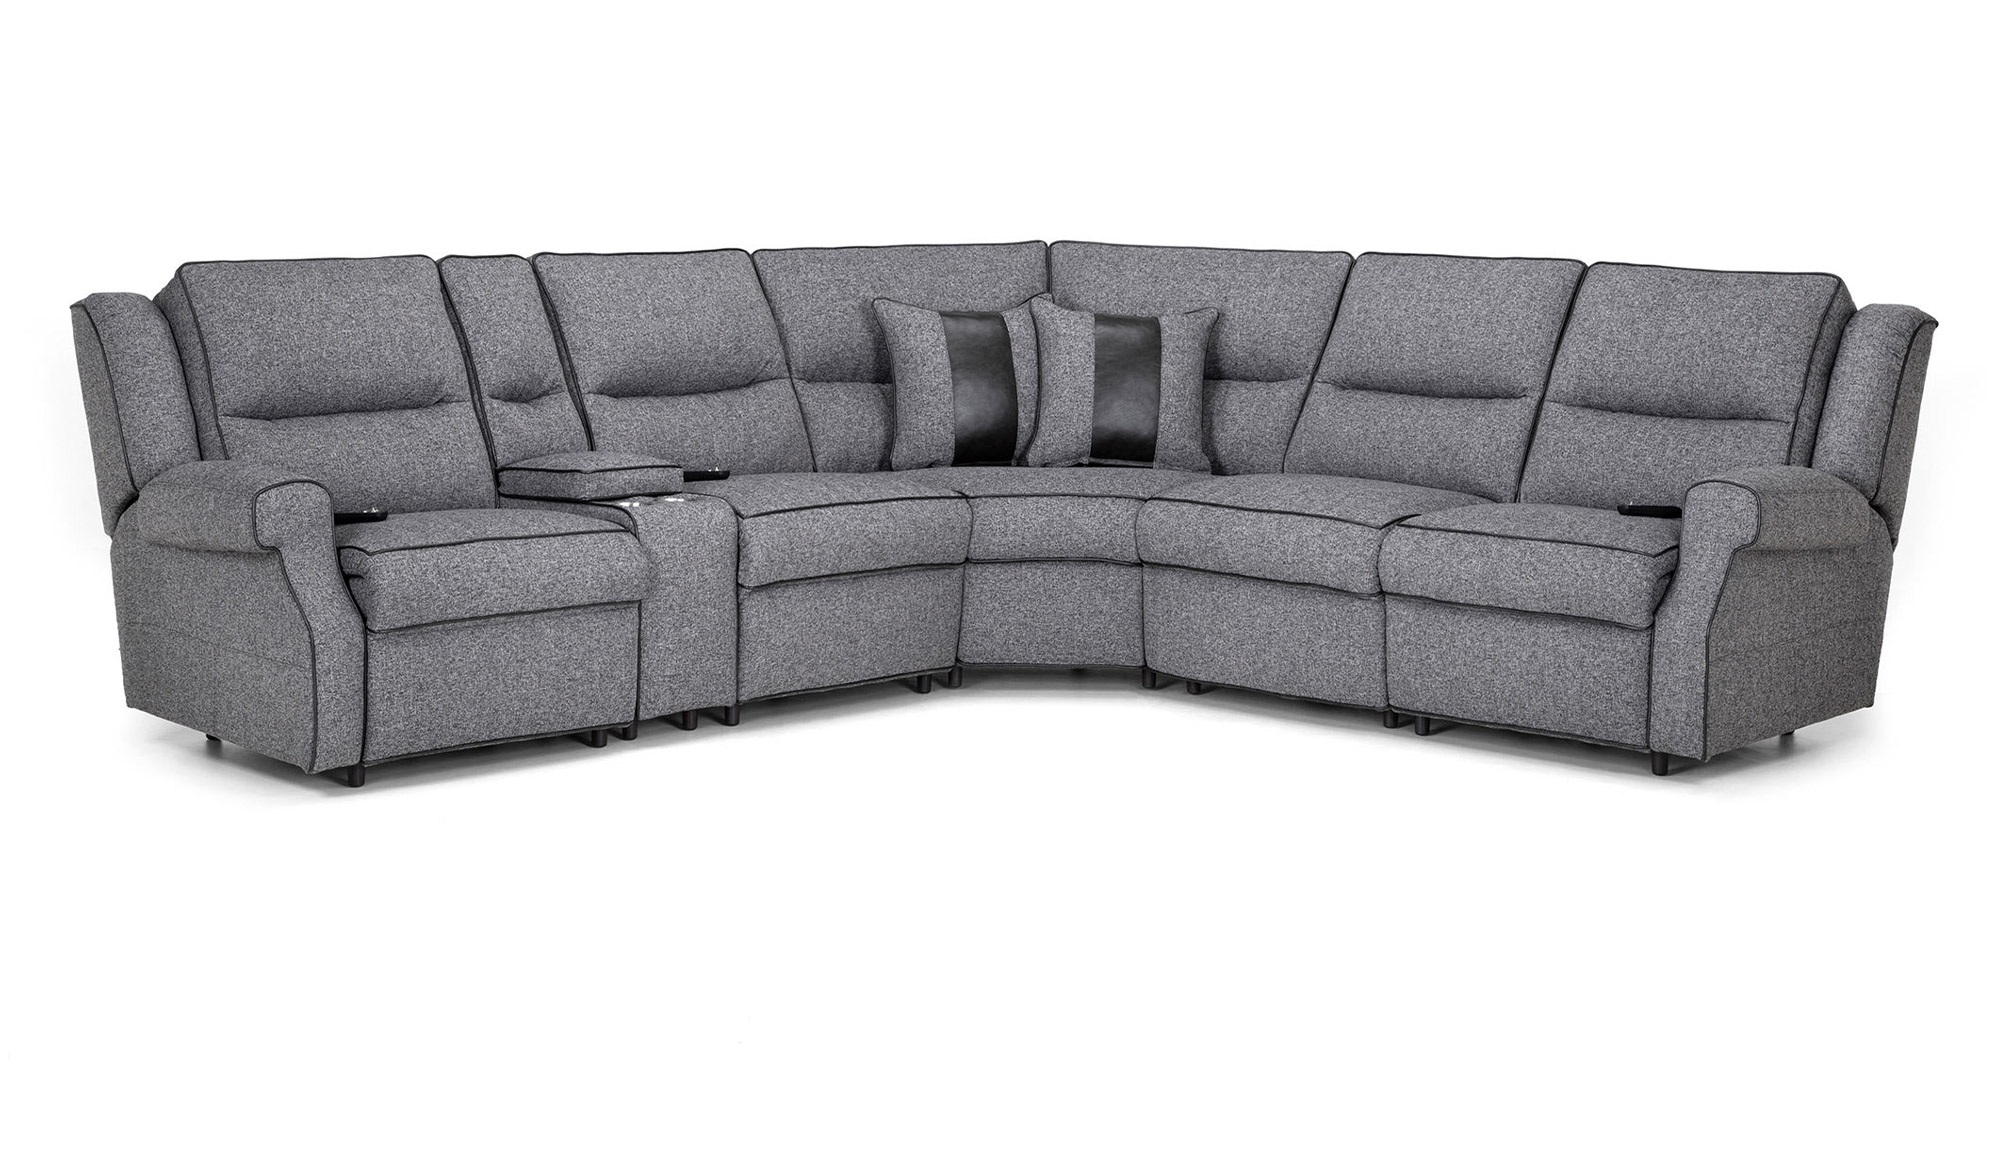  759 Hawkins Sectional in 3805-05 